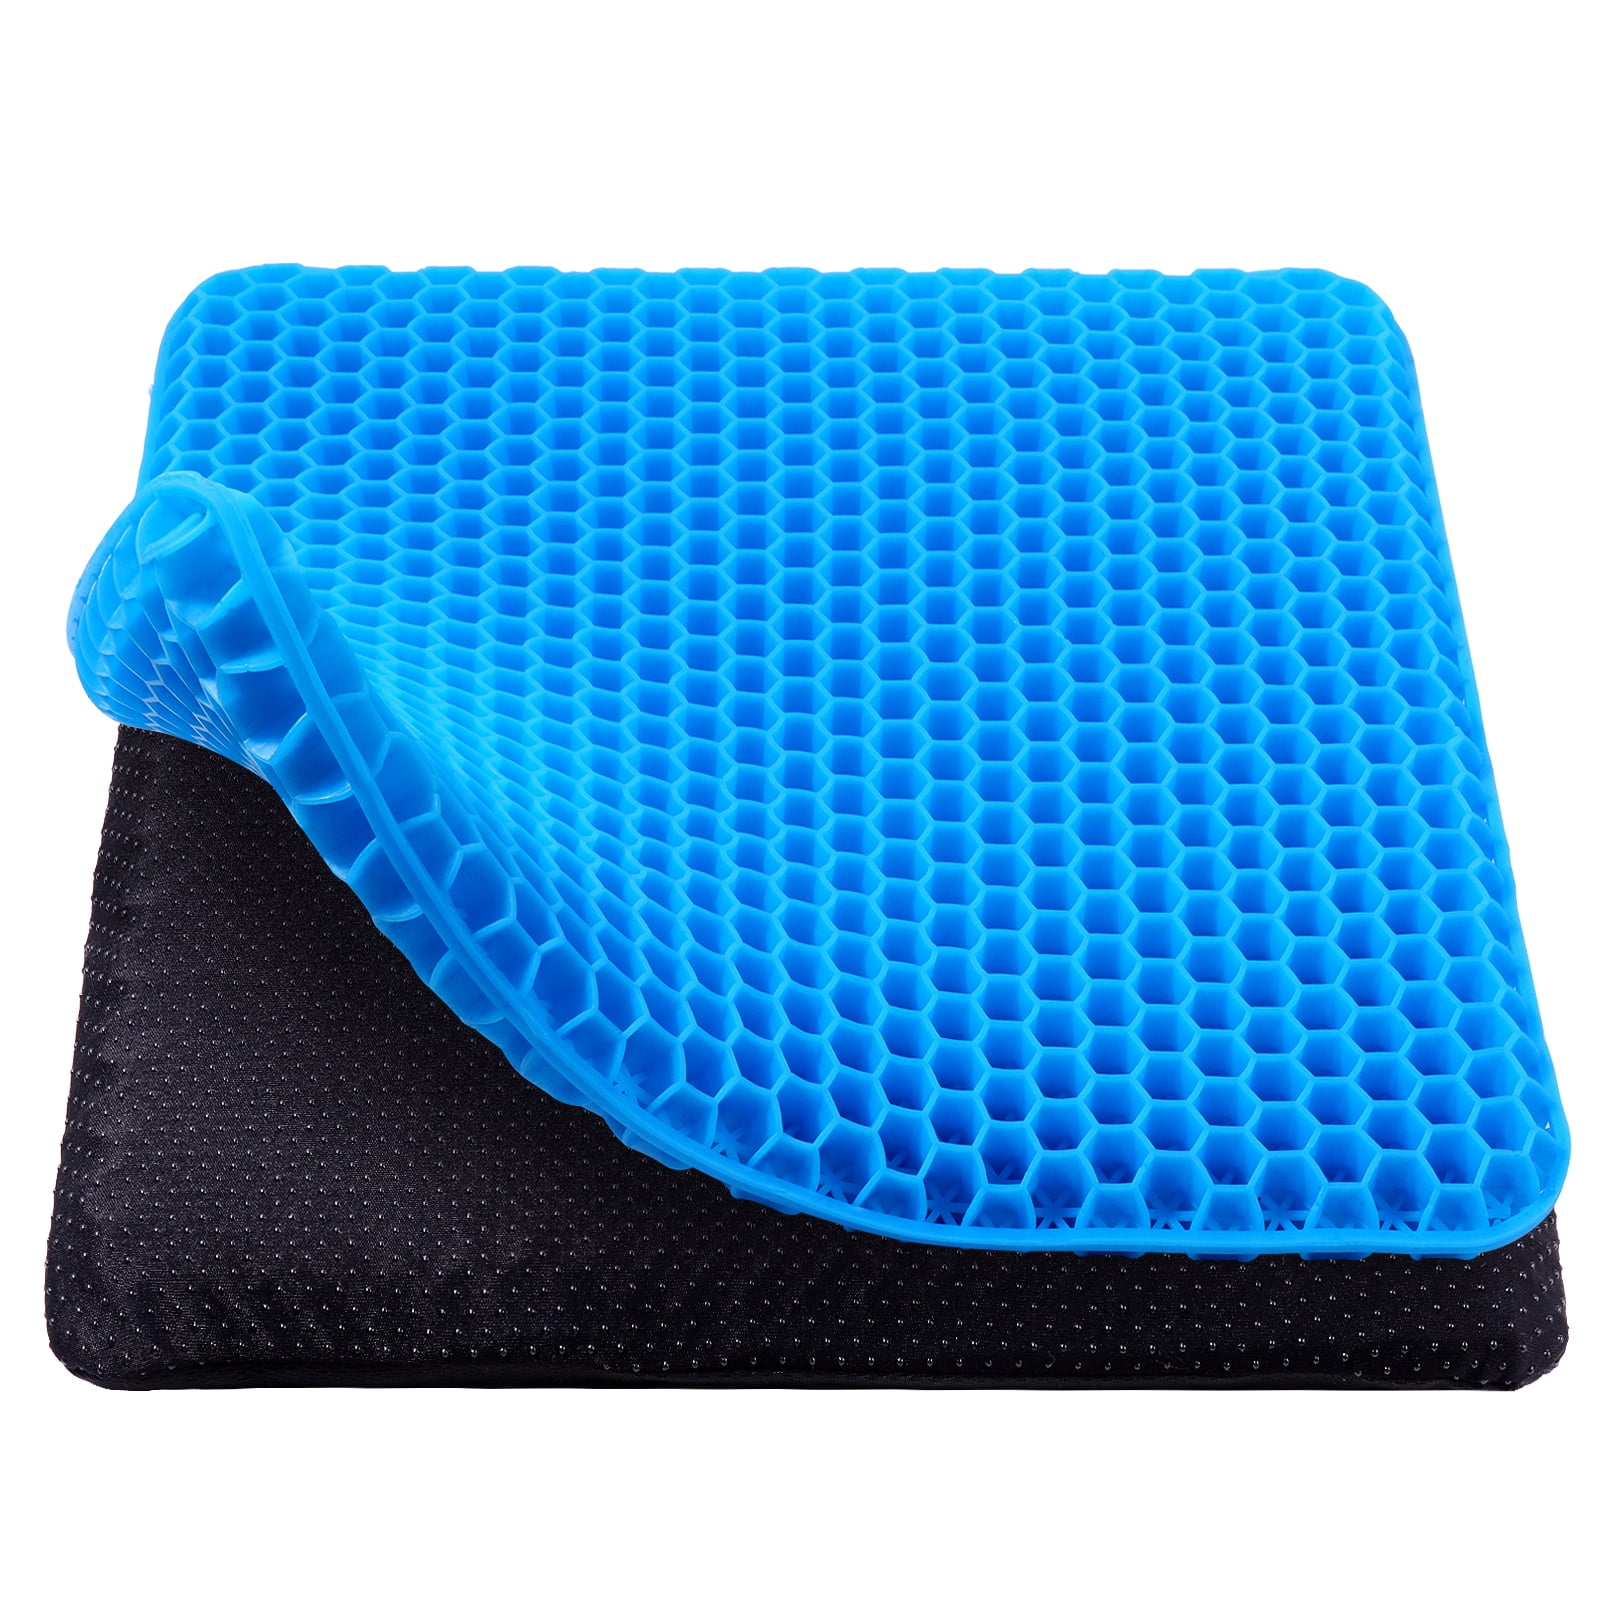 What Is the Best Seat Cushion Material: Gel or Memory Foam?– Cushion Lab